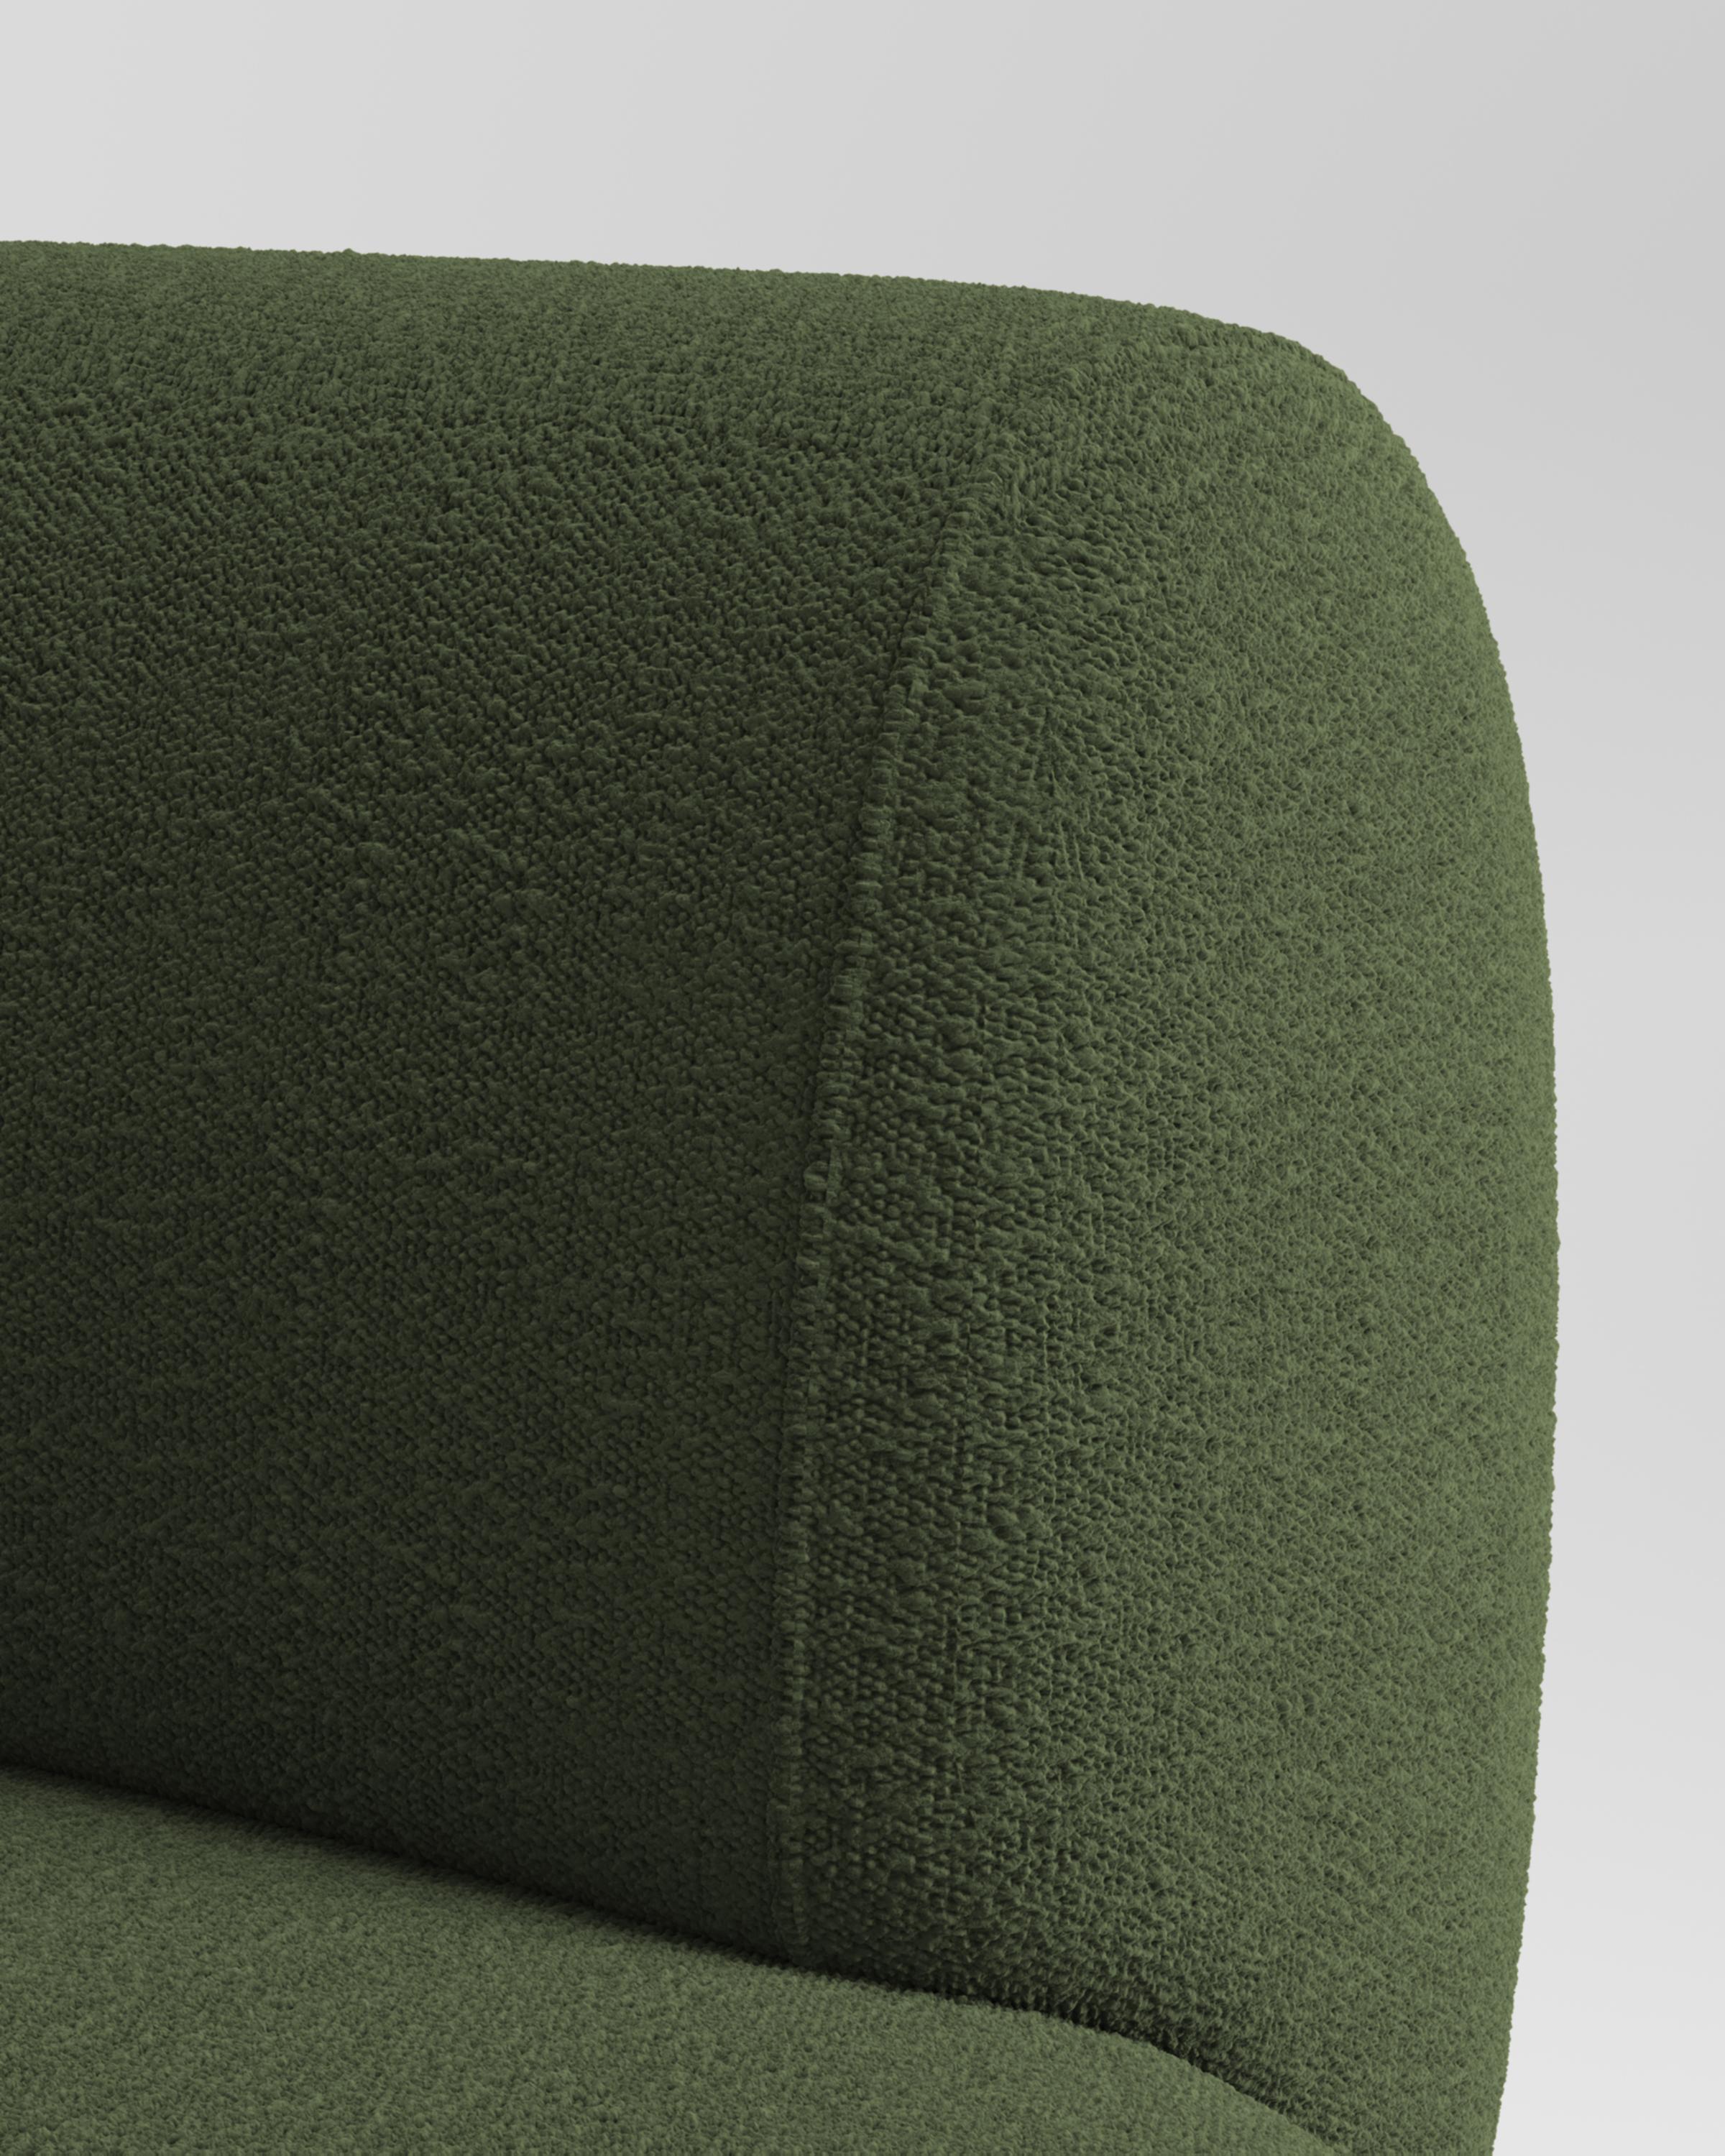 Collector Hug Sofa Designed by Ferrianisbolgi Fabric Boucle Green In New Condition For Sale In Castelo da Maia, PT